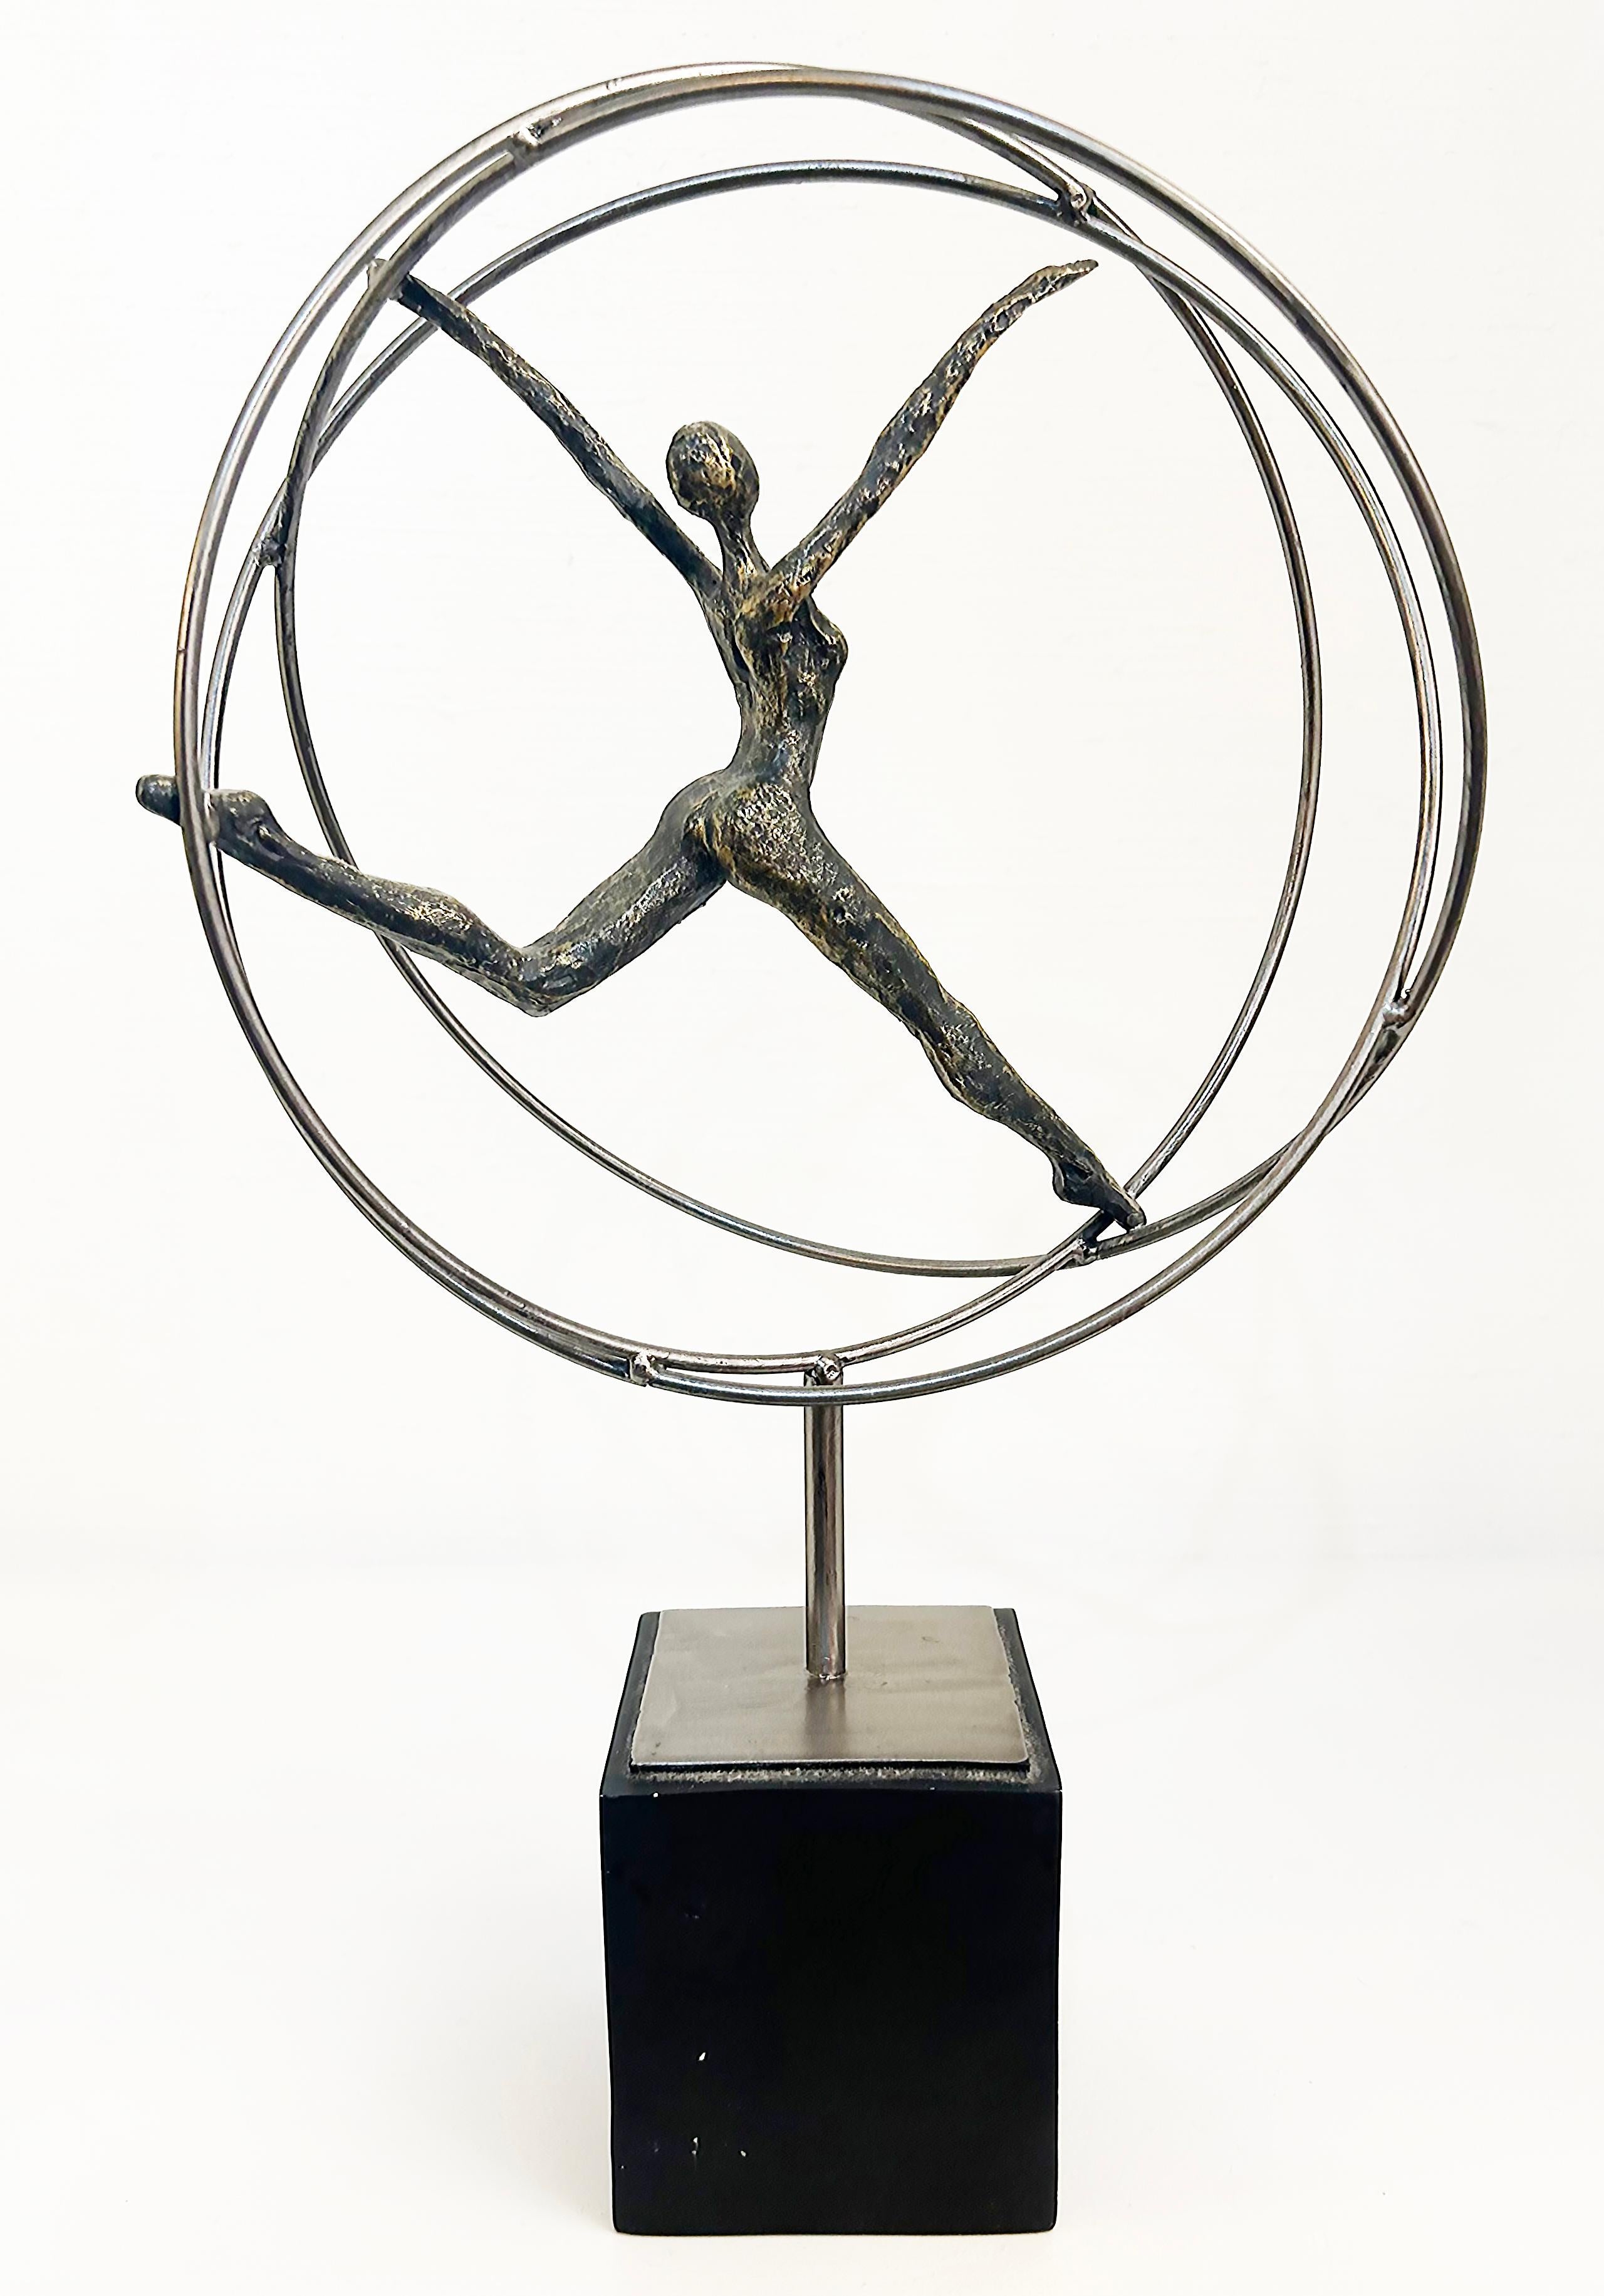 Modern Acrobats on Rings Figurative Metal Sculpture Mounted on Square Base

Offered for sale is a modern metal sculpture of an acrobatic figure in brass dancing within multiple metal rings.  The sculpture is supported by a stem that rises from a